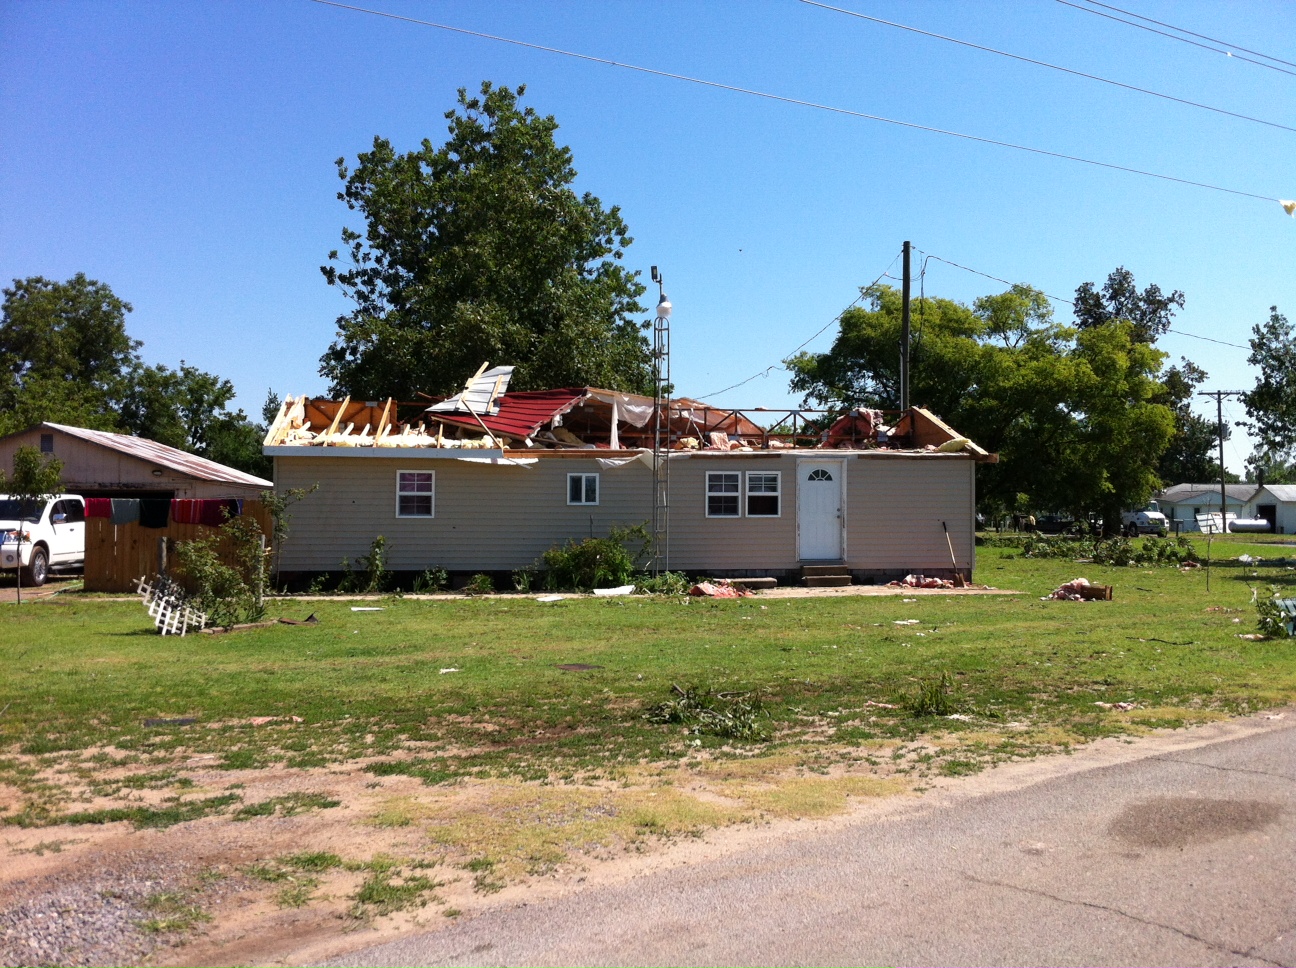 Photo of damage in Diehlstadt, MO on June 4